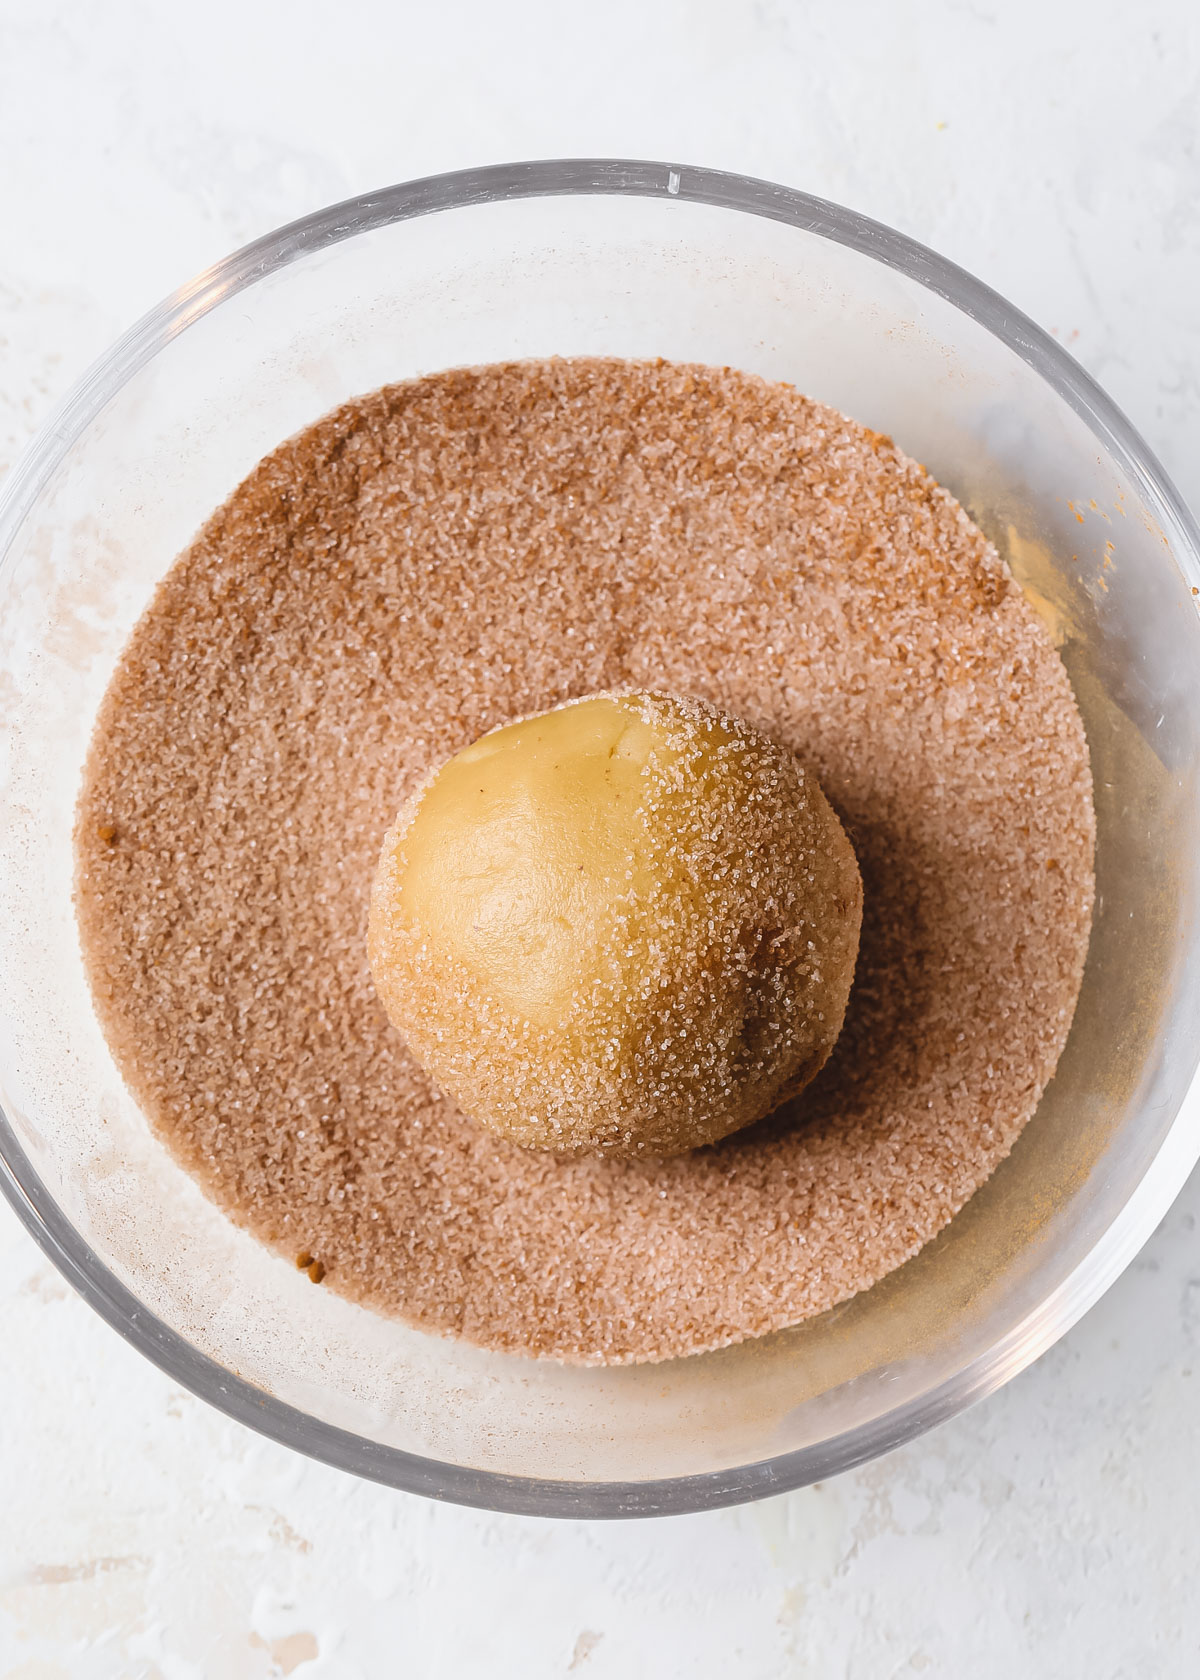 A ball of snickerdoodle cookie dough rolling in a bowl of cinnamon and sugar